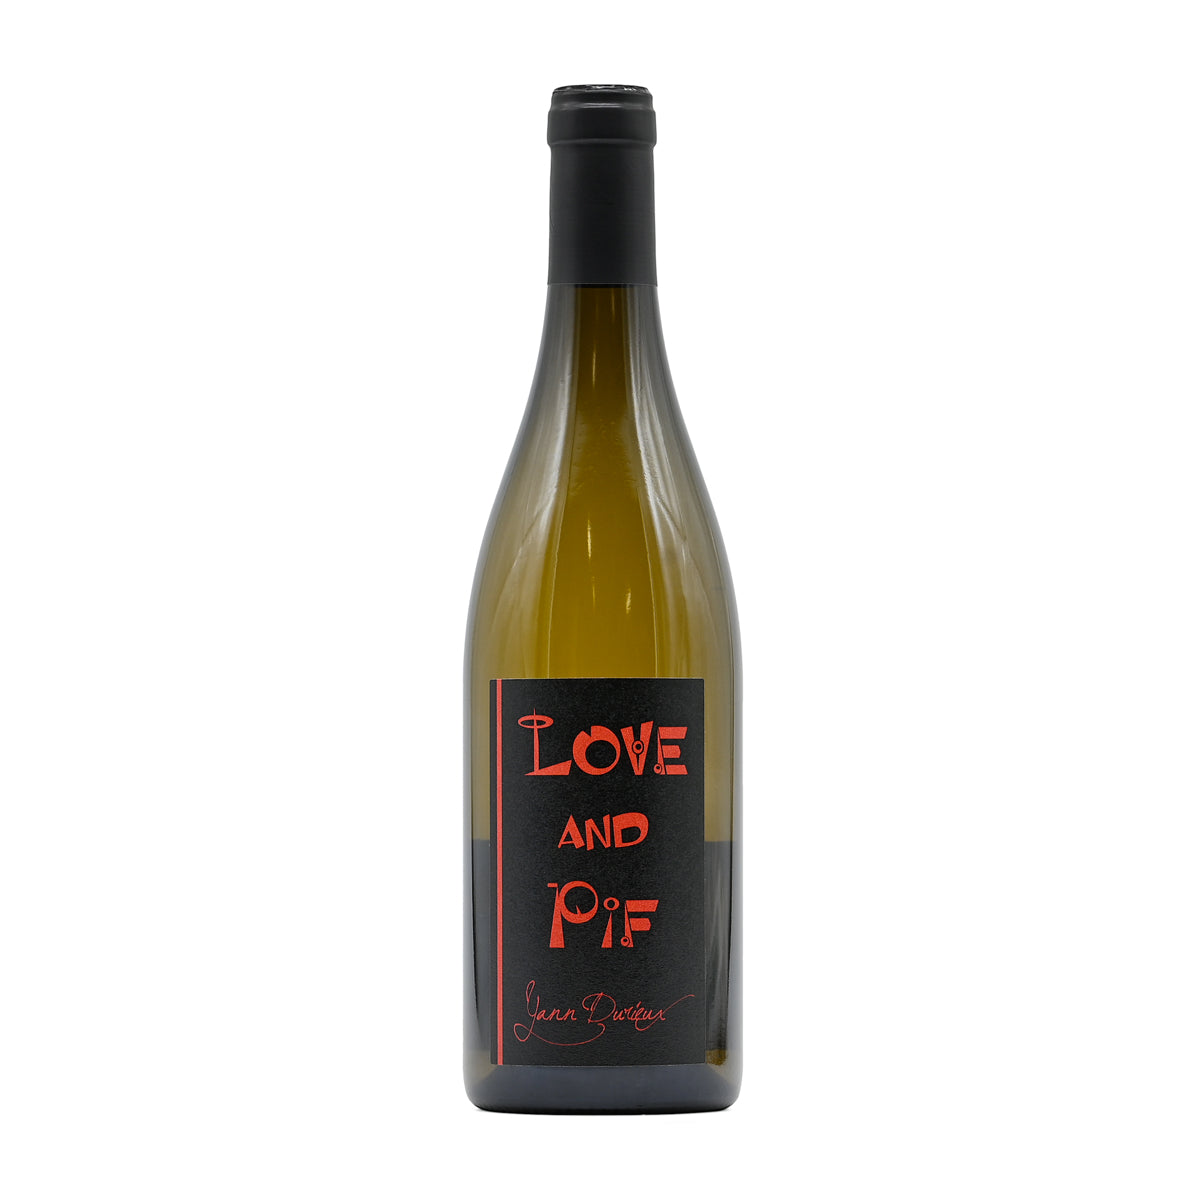 Yann Durieux VDF Love and Pif 2020, 750ml French white wine, made from Aligote; Vin de France, from Recrue Des Sens, Burgundy, France – GDV Fine Wines, Hong Kong